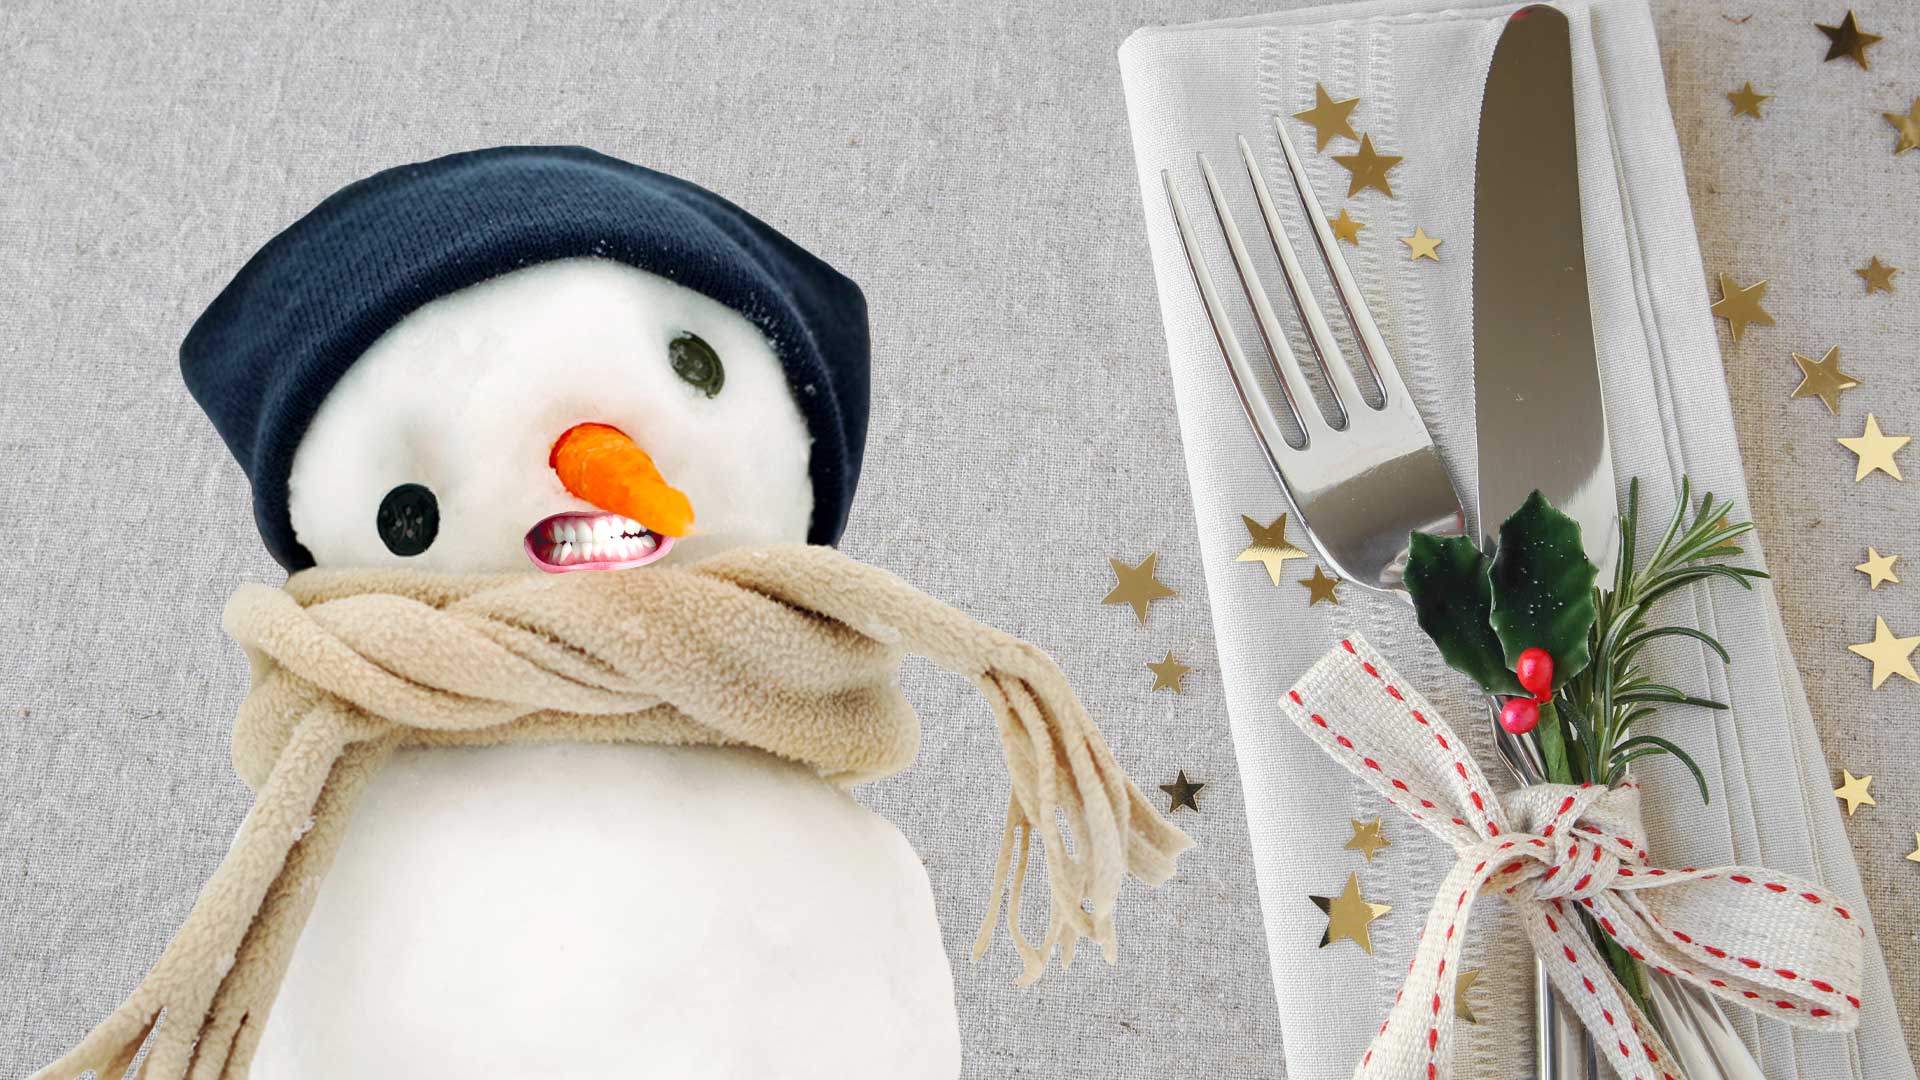 A snowman and cutlery